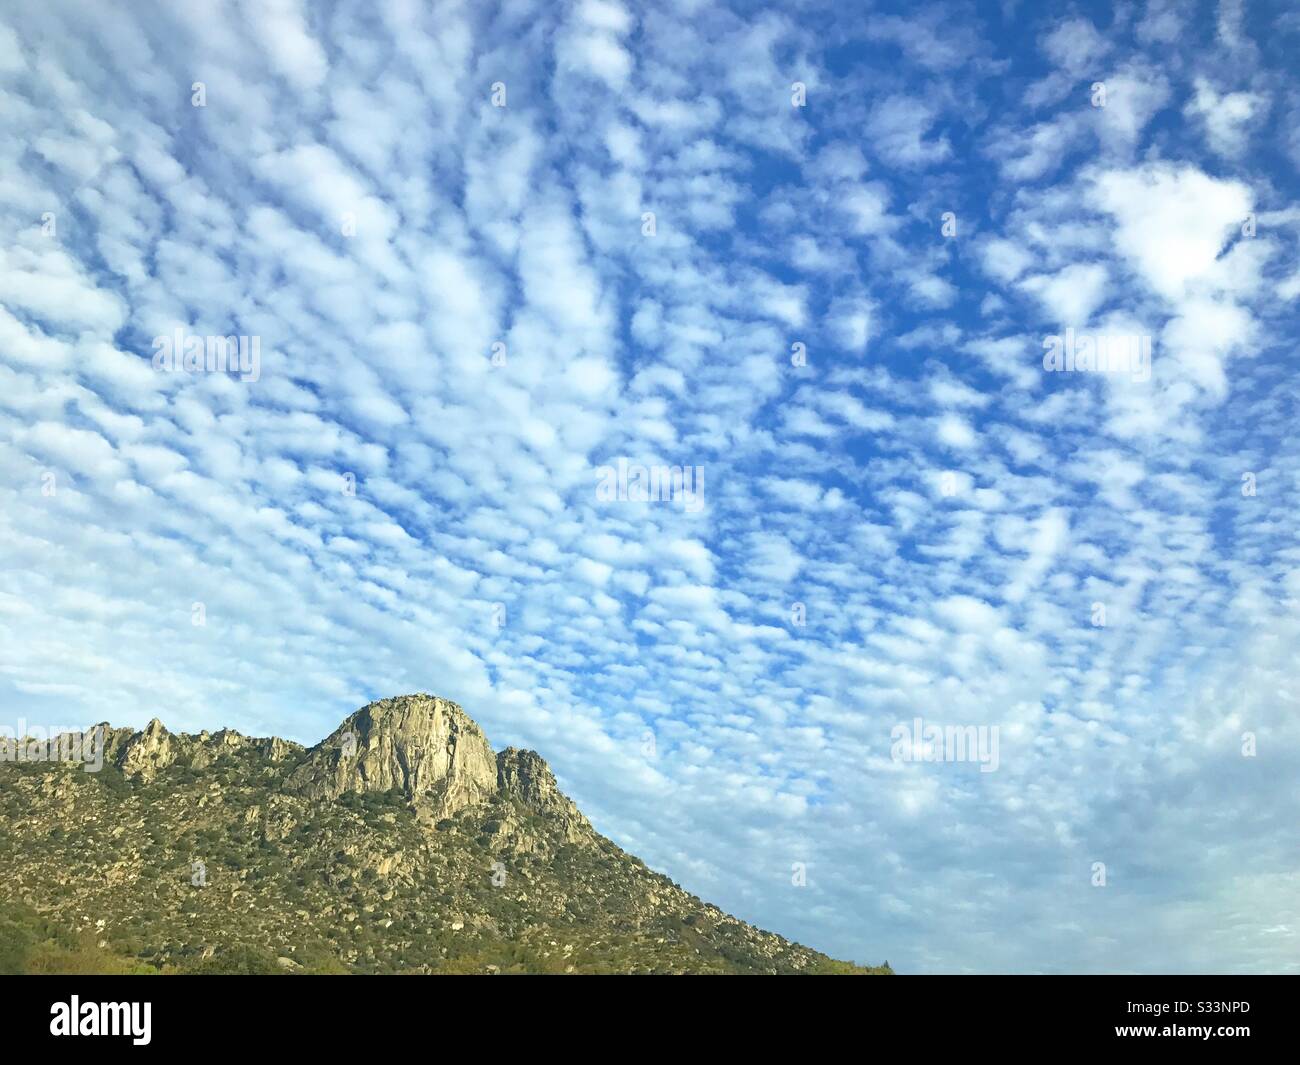 Mountain and cloudy sky. Stock Photo